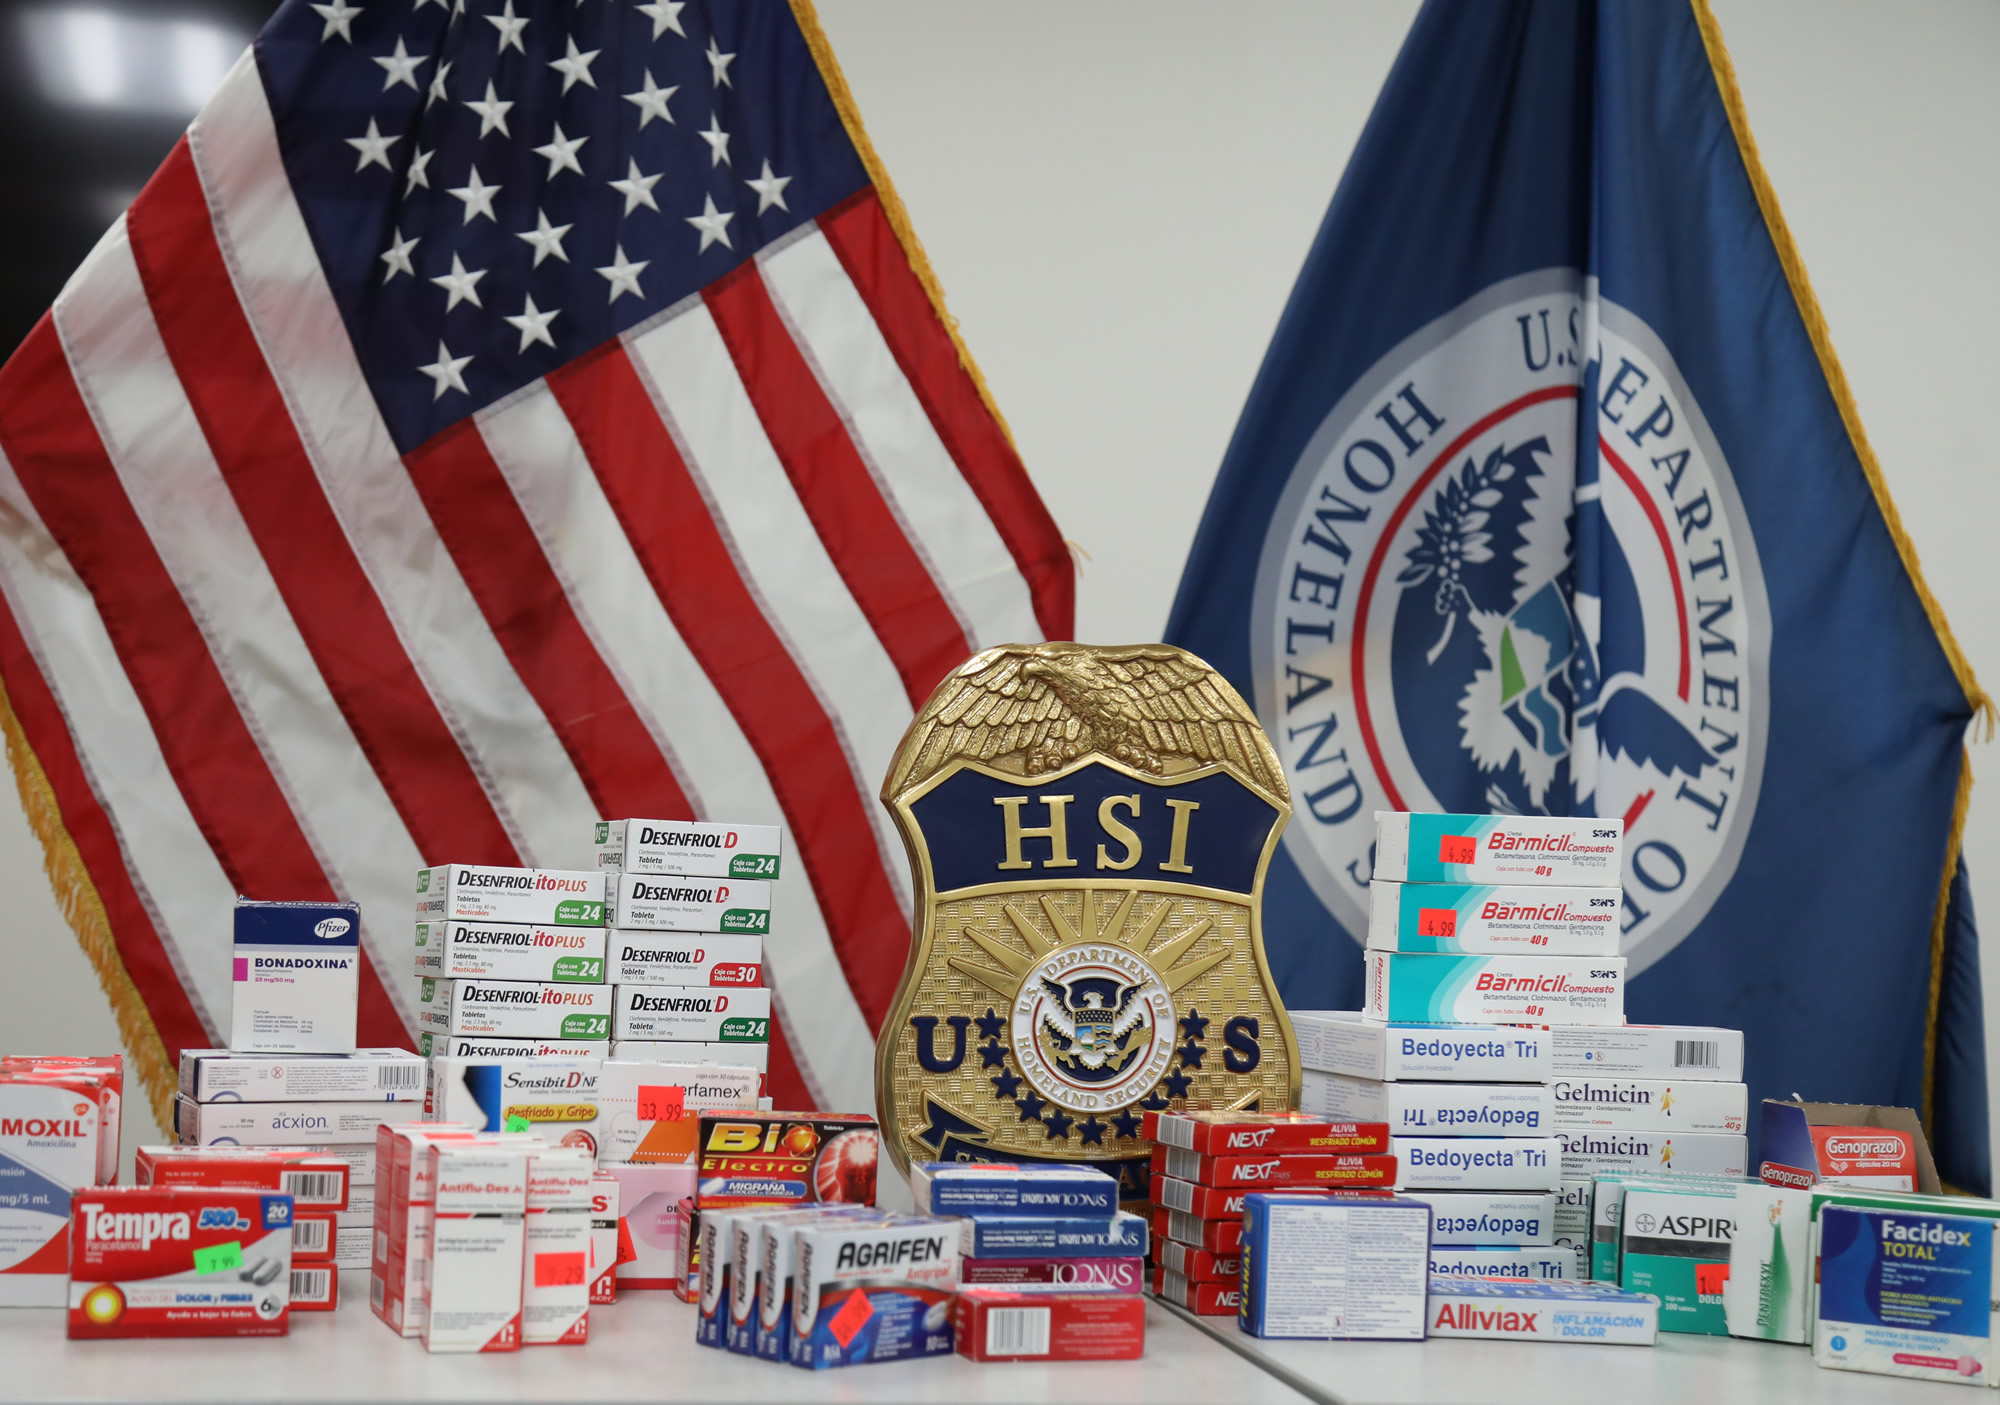 HSI El Paso special agents seized 10,617 doses of counterfeit pharmaceuticals and prescription drugs from area businesses, including a flea market stand.